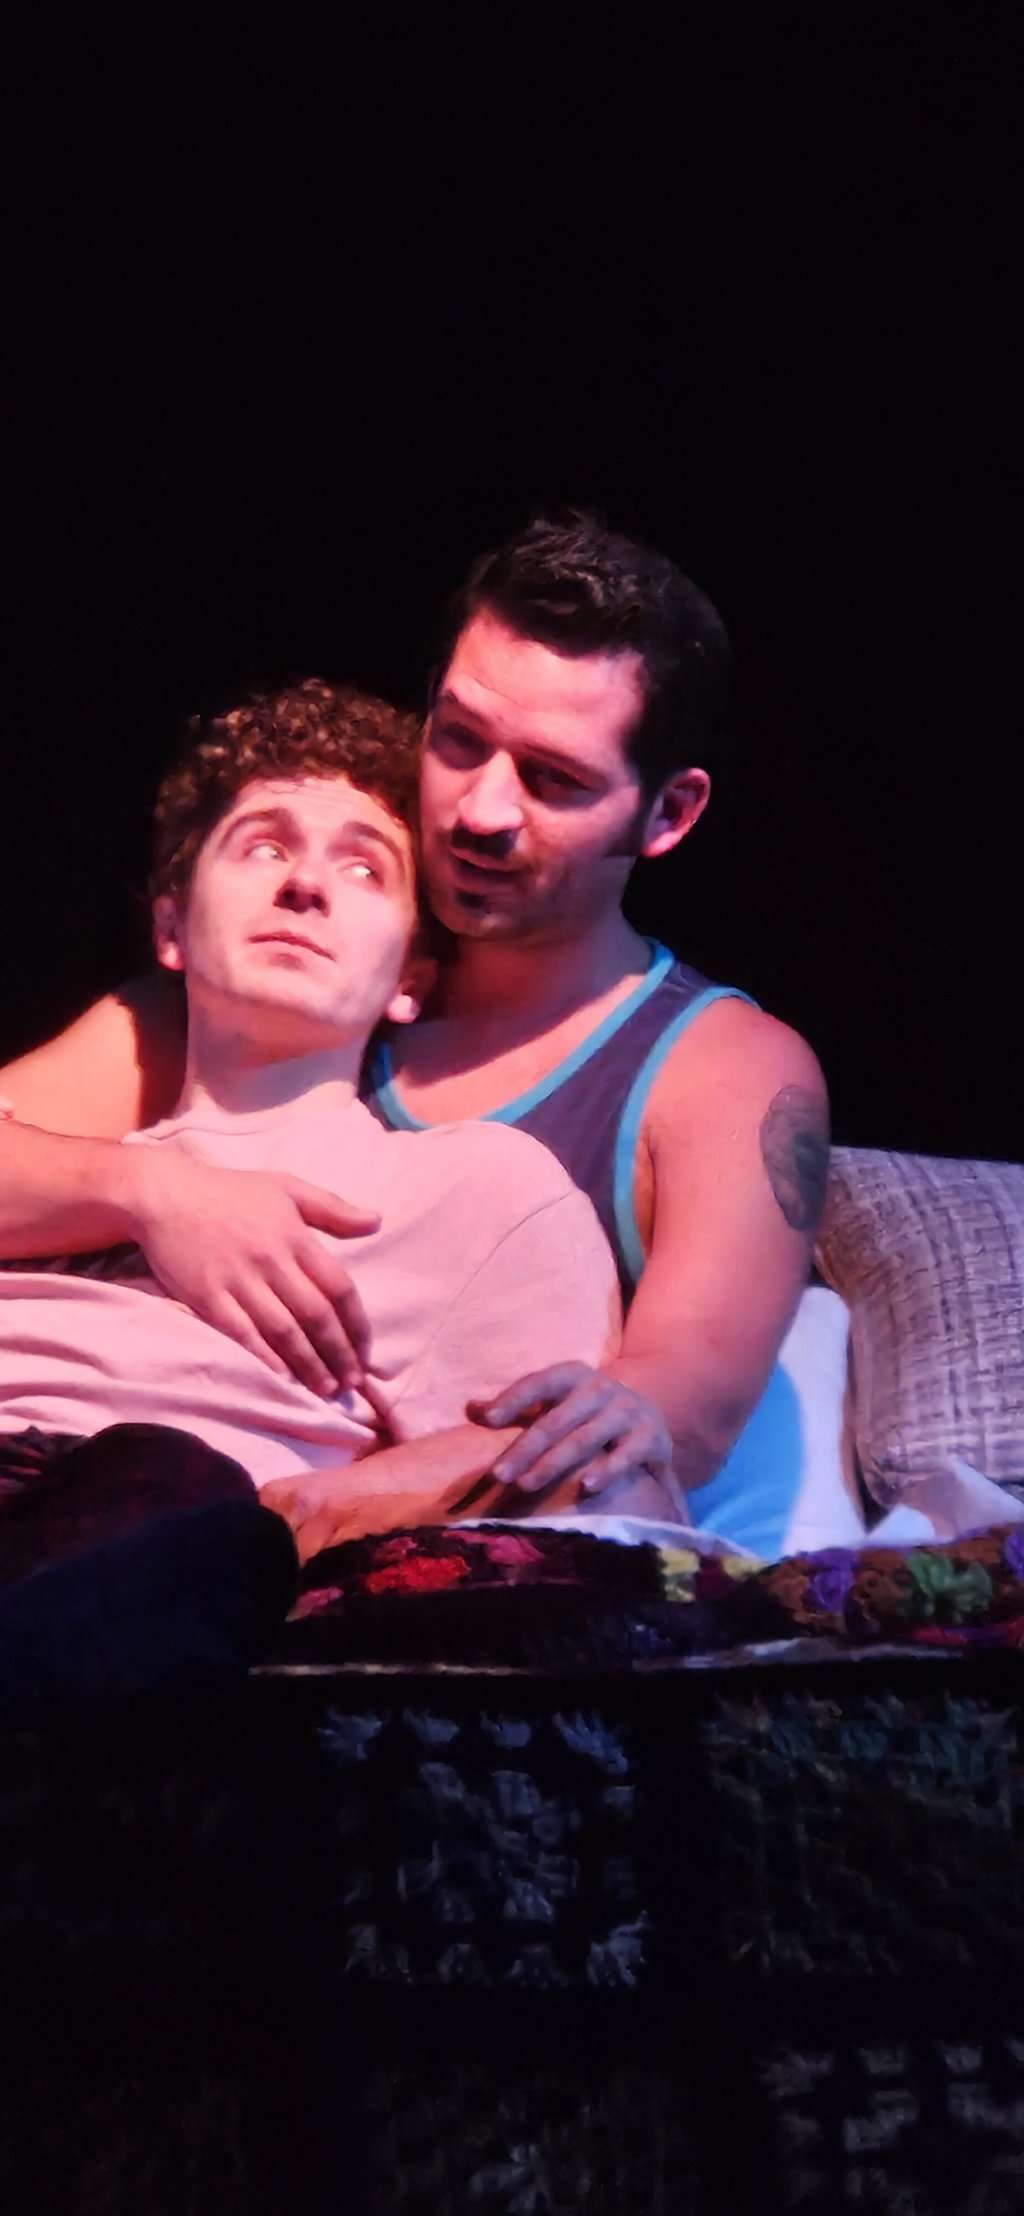 Arnold (Patric Madden) and Ed (Jay Torres) in Torch Song.